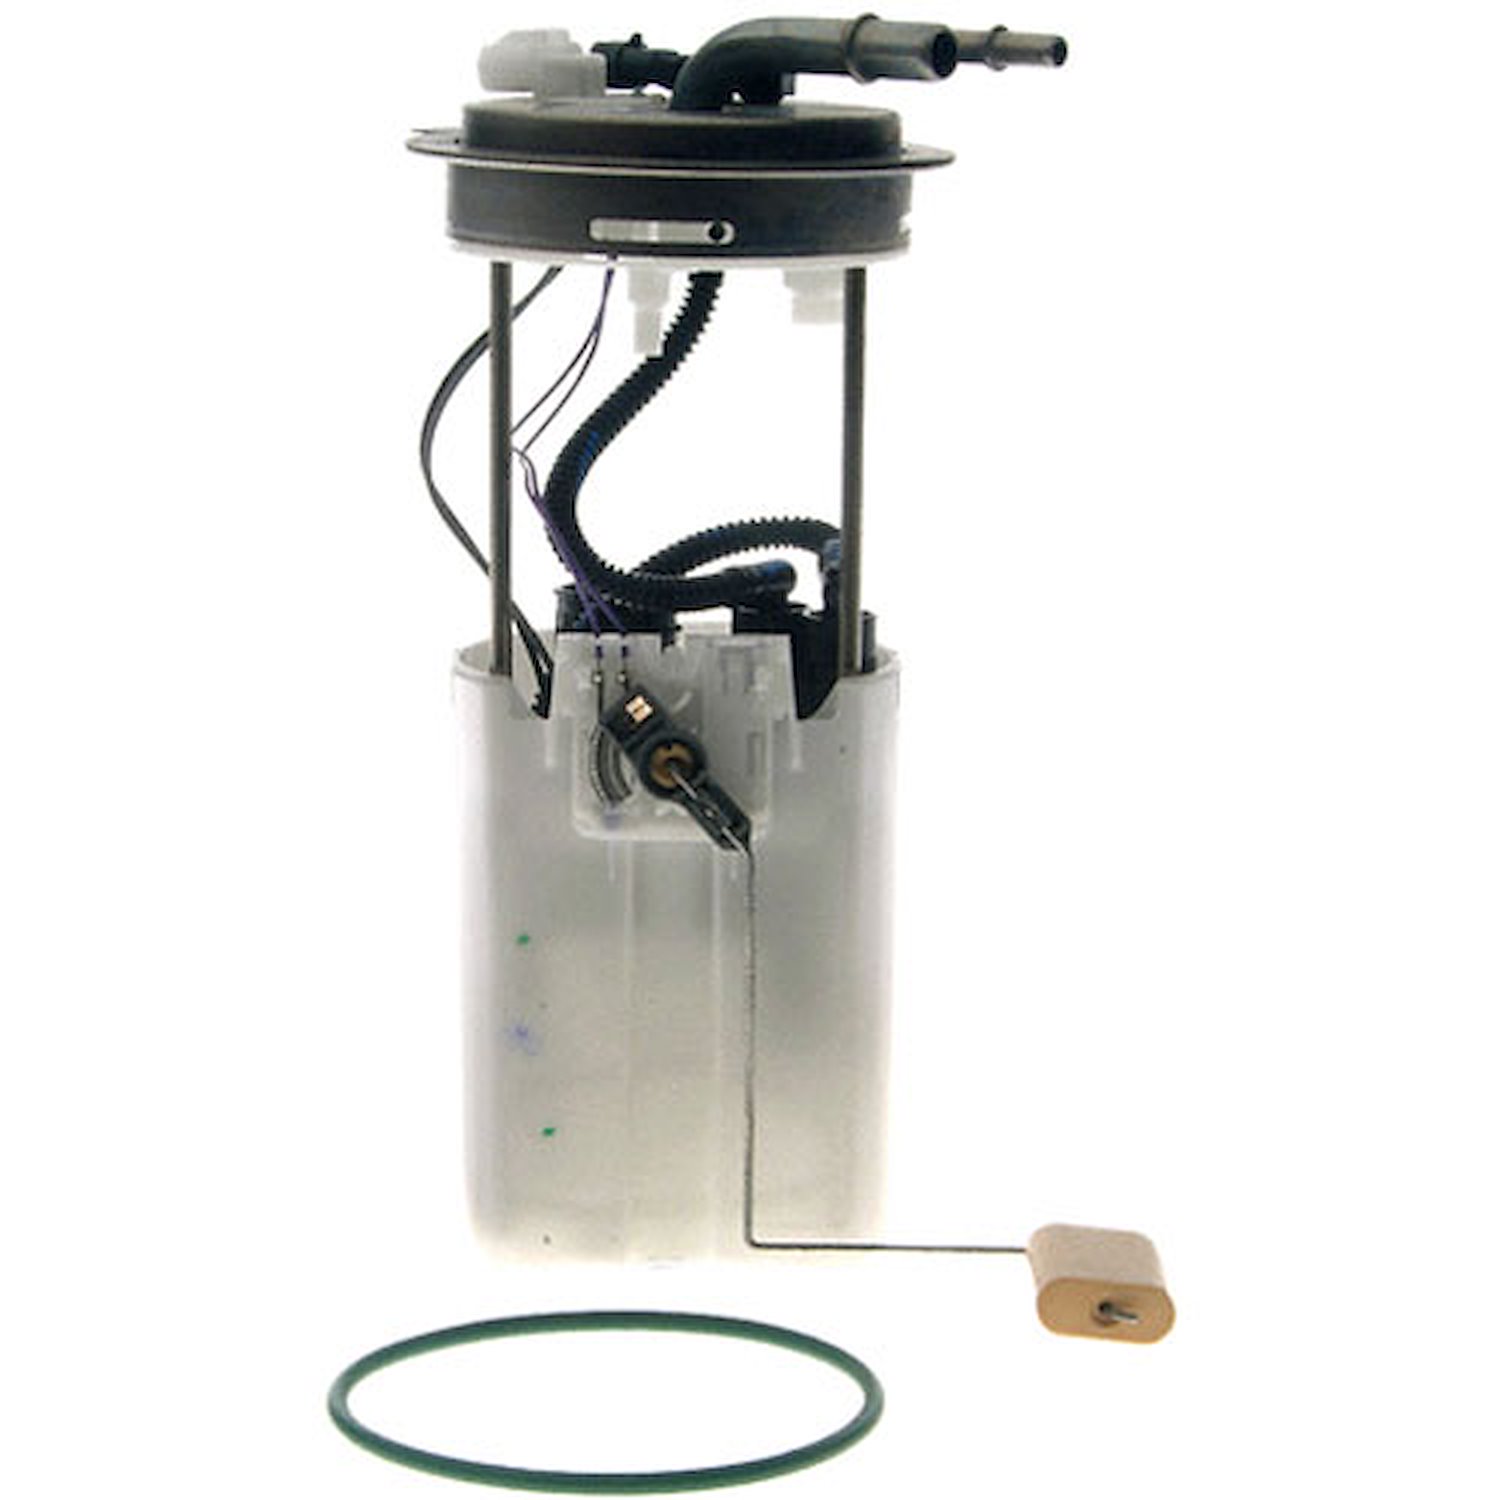 OE GM Replacement Electric Fuel Pump Module Assembly 2005-08 Chevrolet Express 3500 4.8L/6.0L V8